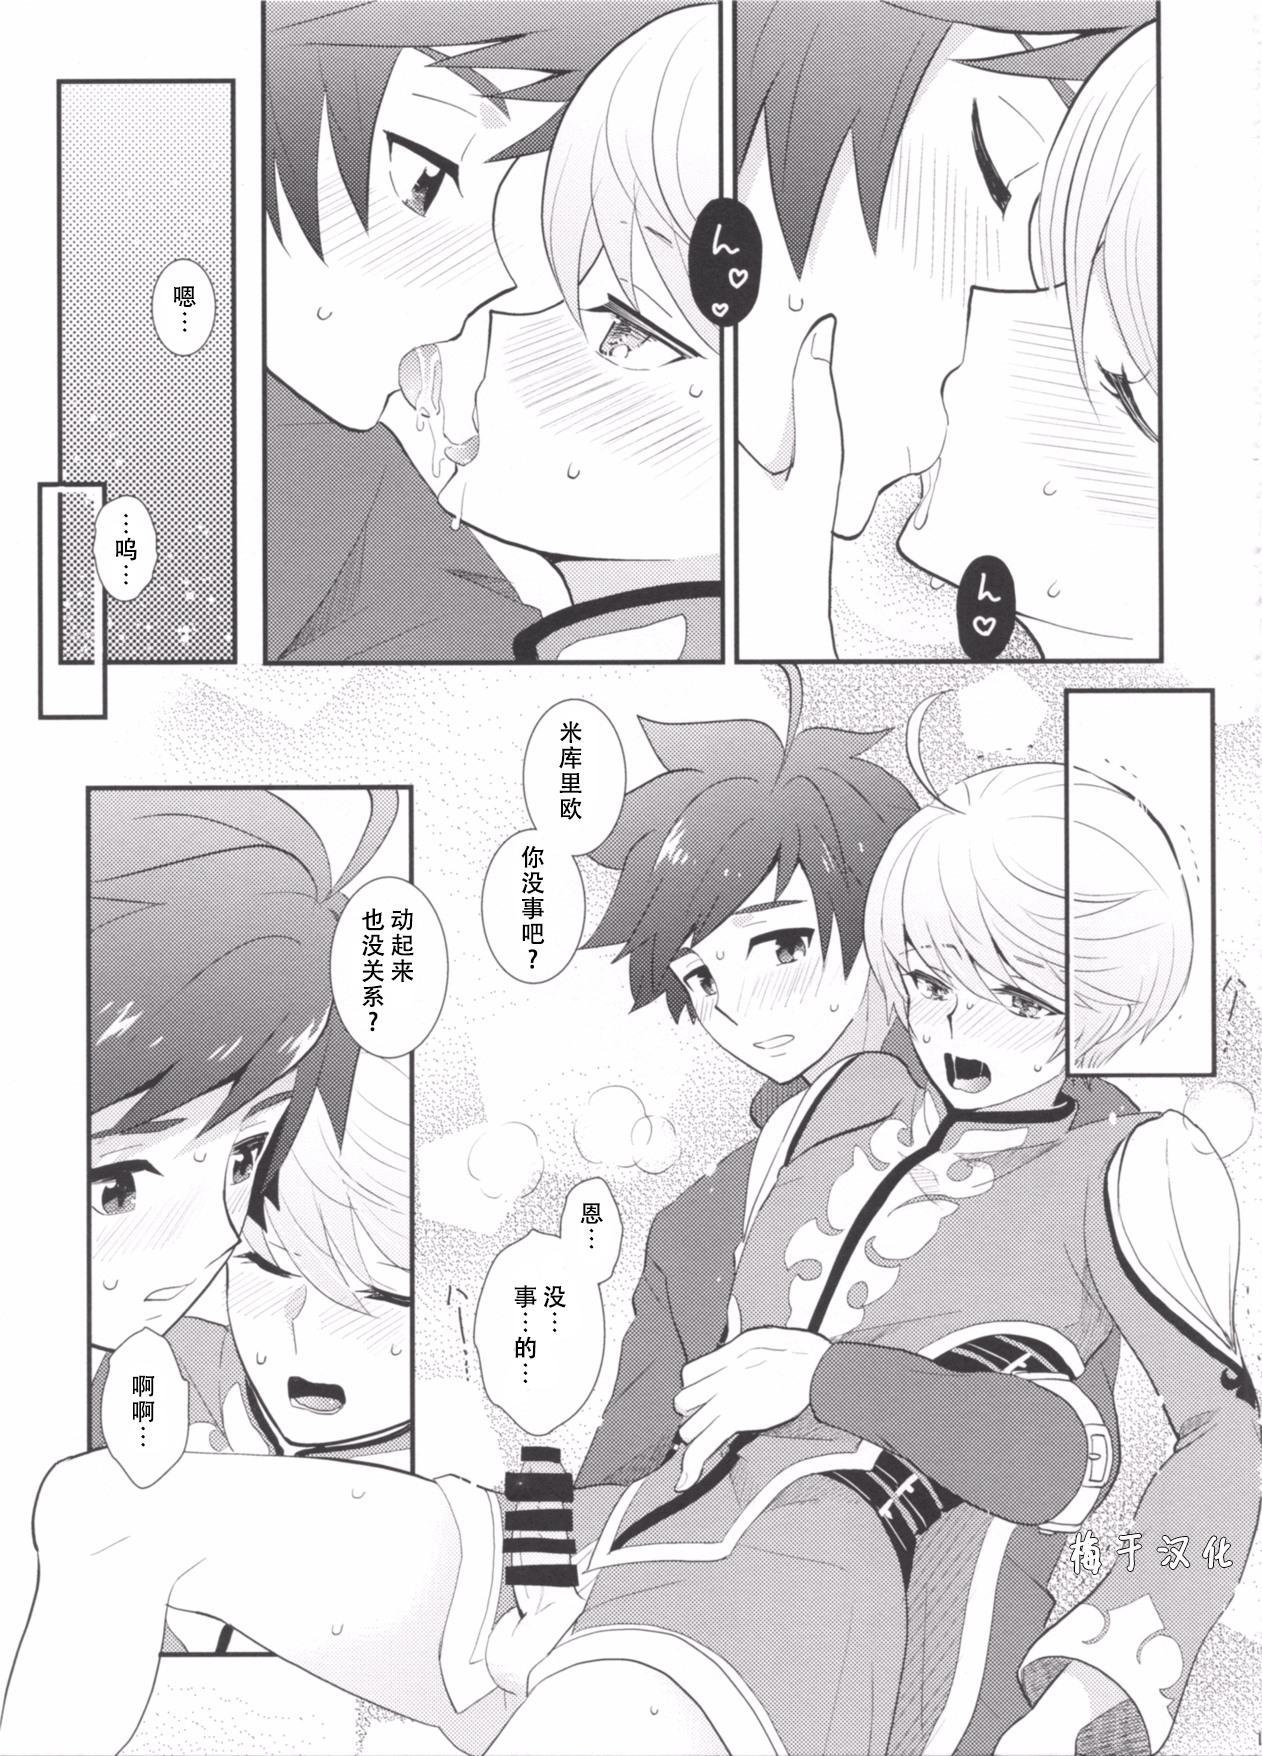 Squirters とろける体温 - Tales of zestiria Naughty - Page 10